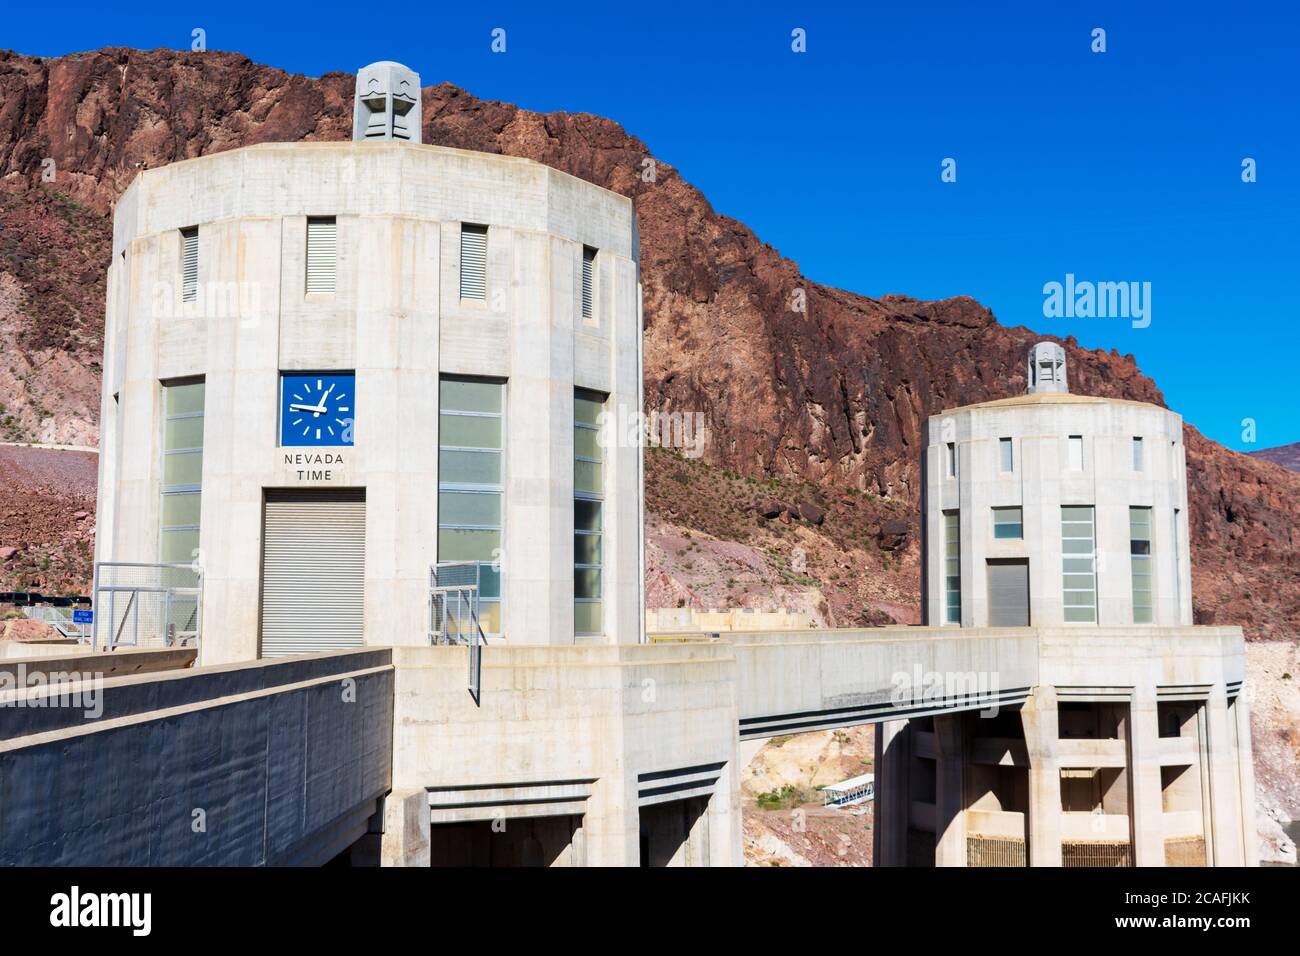 Two water intake towers on the Nevada side of the historic Hoover Dam. A clock showing Nevada time - Las Vegas, Nevada, USA - 2020 Stock Photo